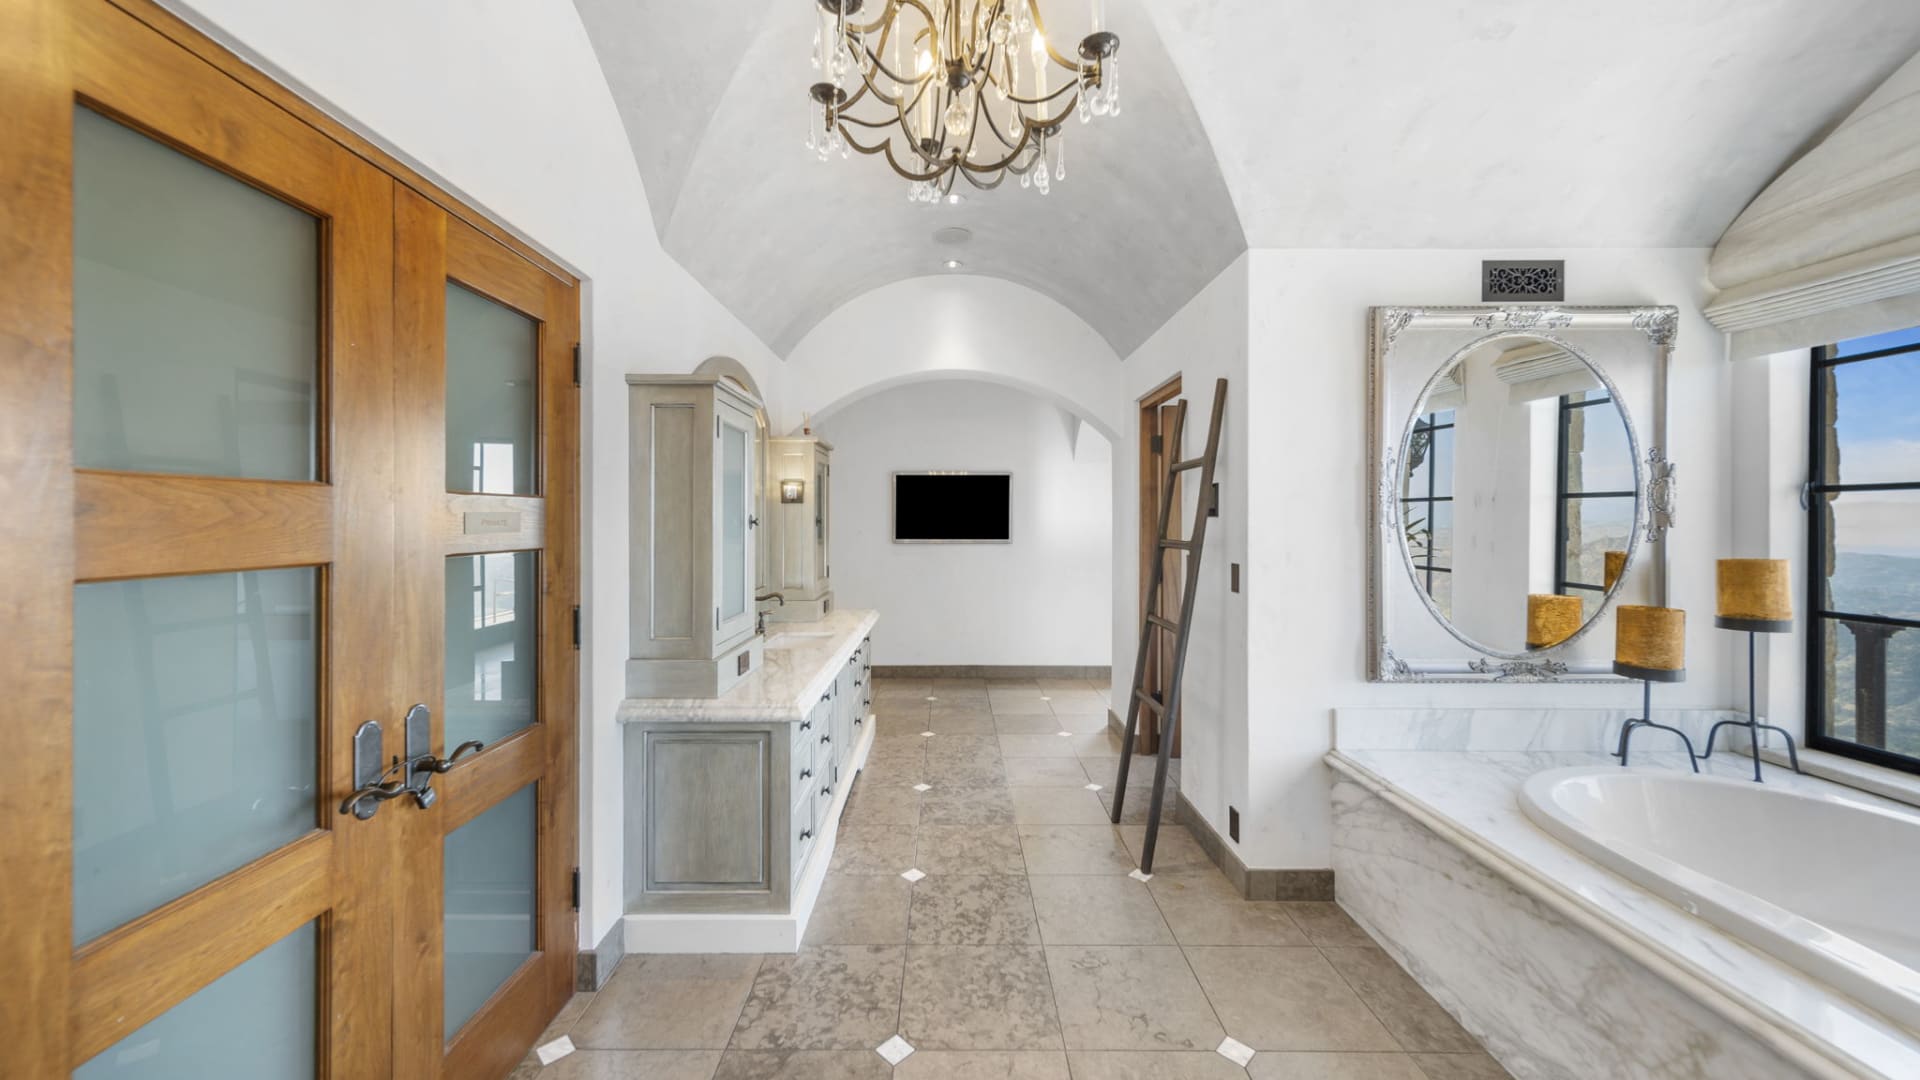 The primary suite's marble-clad bathroom and arched ceilings.